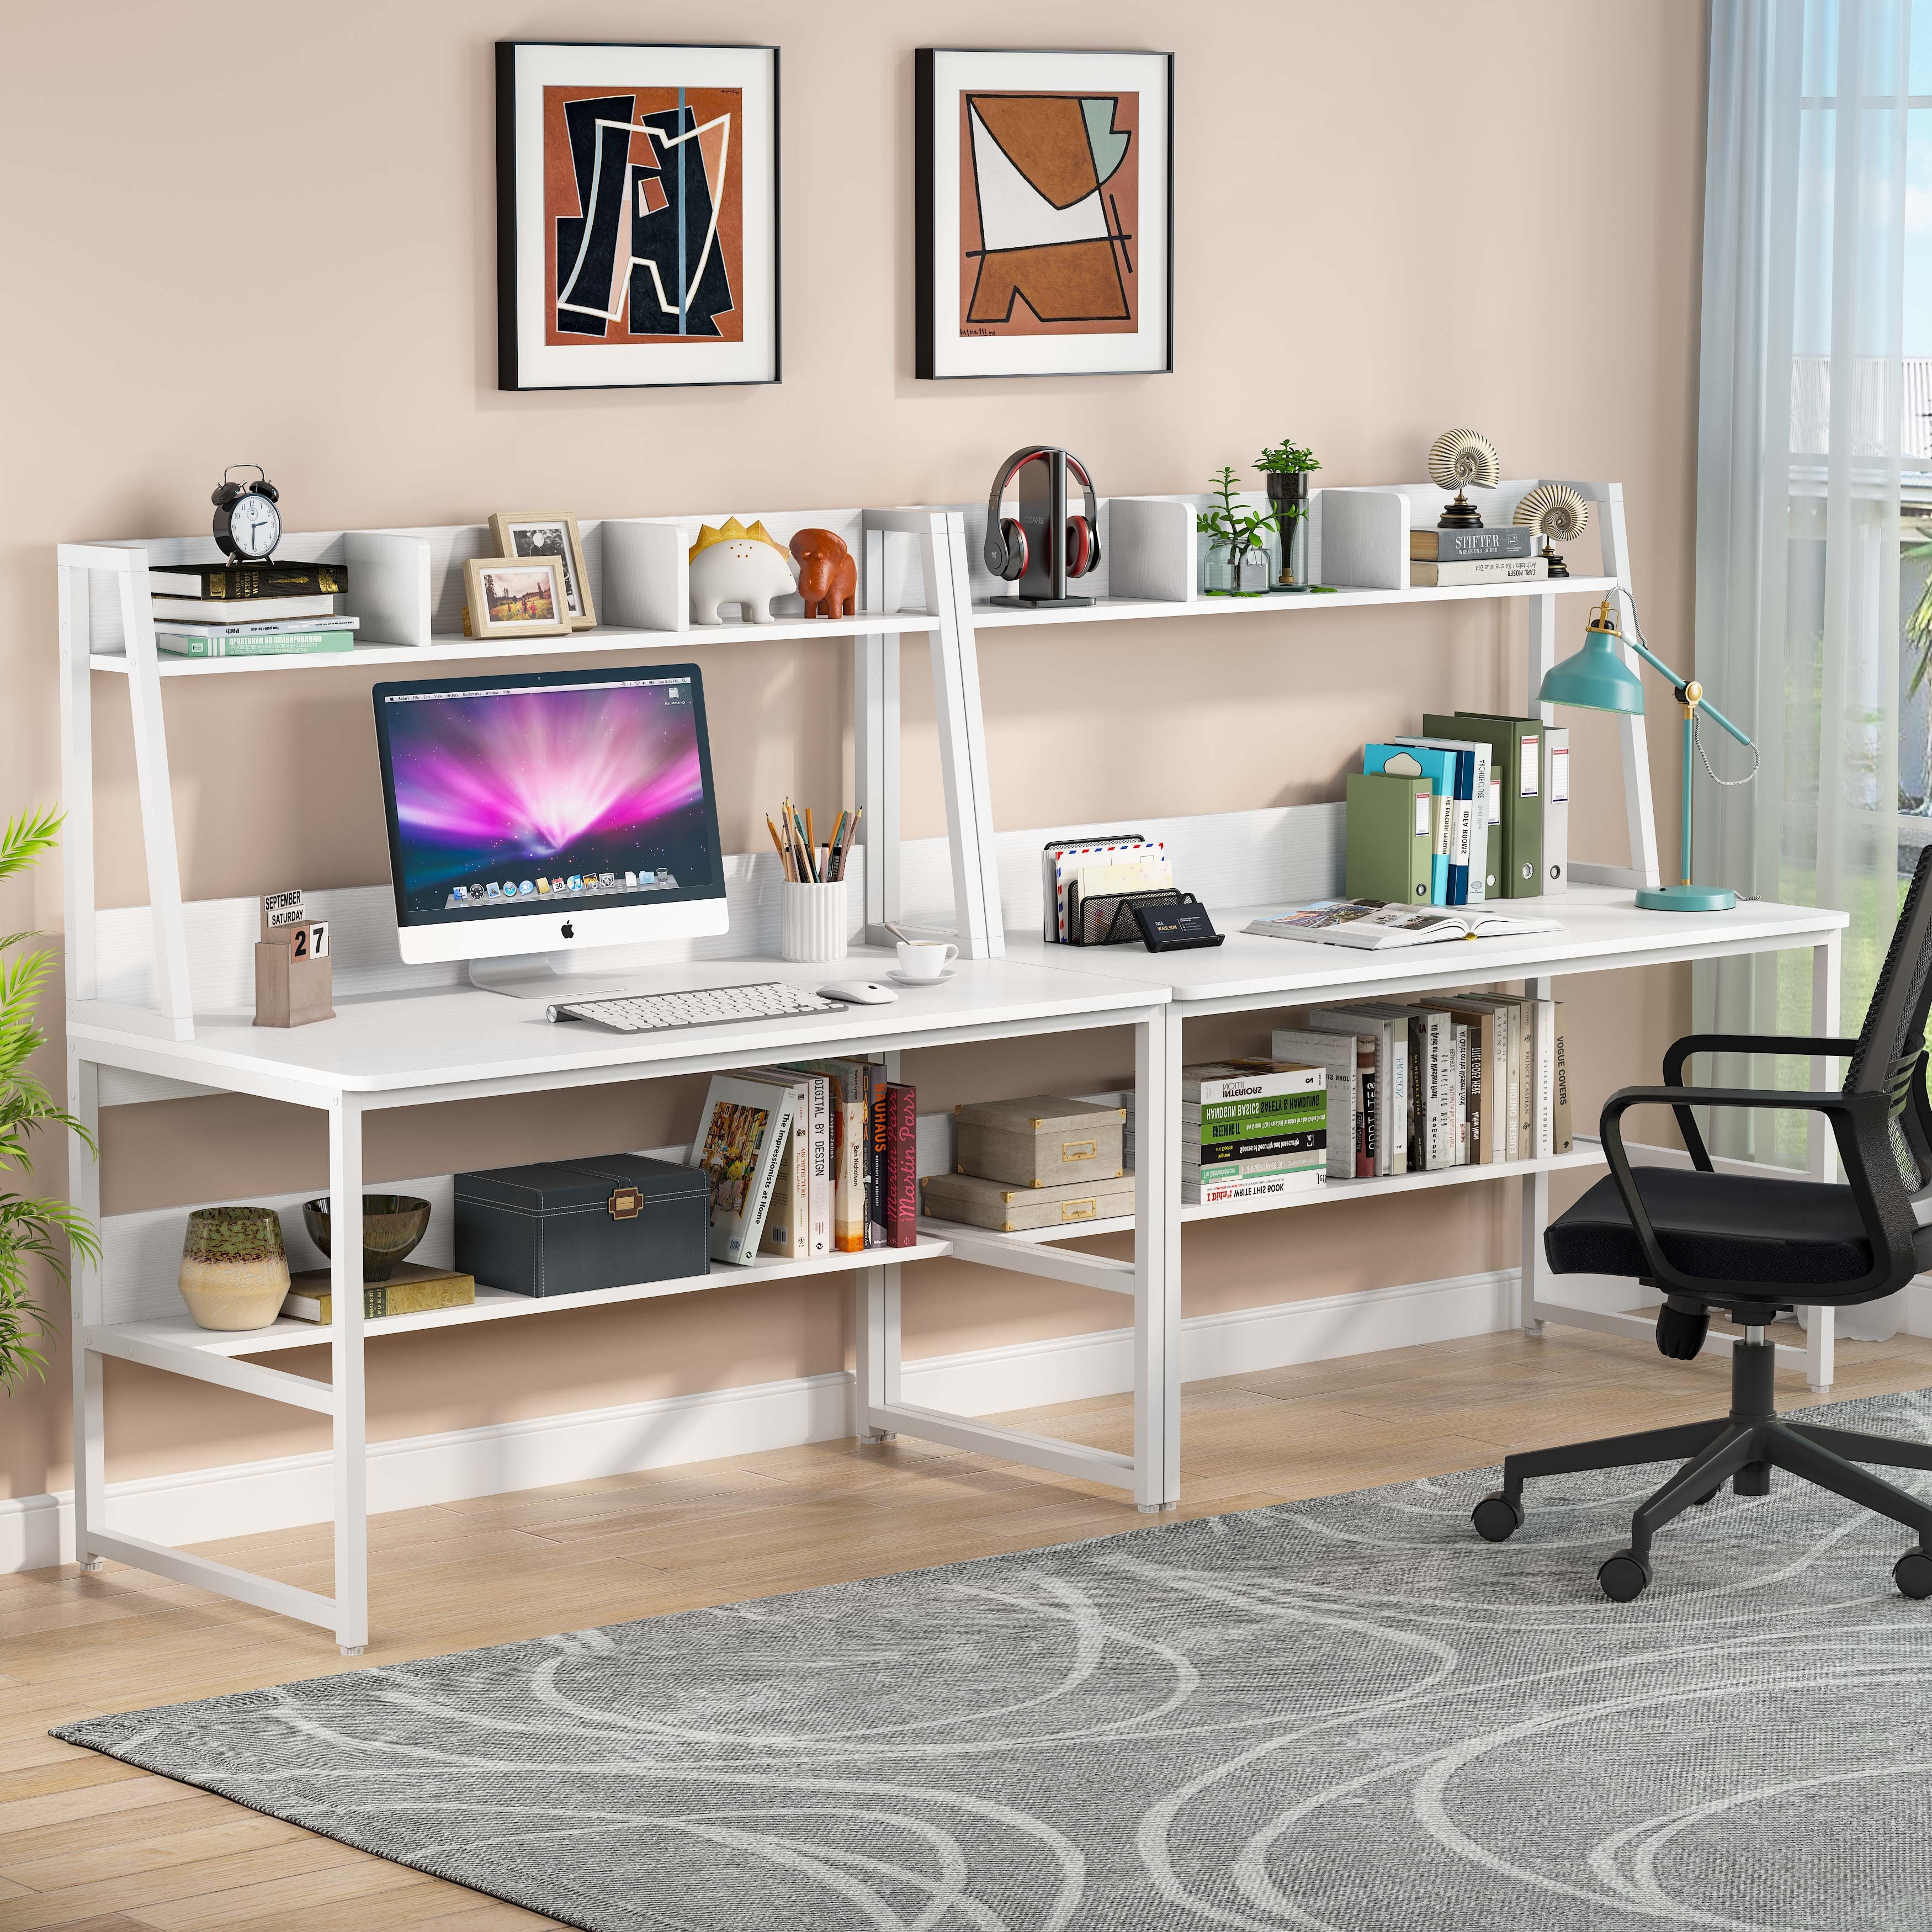 https://ak1.ostkcdn.com/images/products/is/images/direct/06165a7ee2abc3d9d626e89940acd6146b52dd83/47%22-Computer-Desk-with-Hutch-and-Bookshelf.jpg